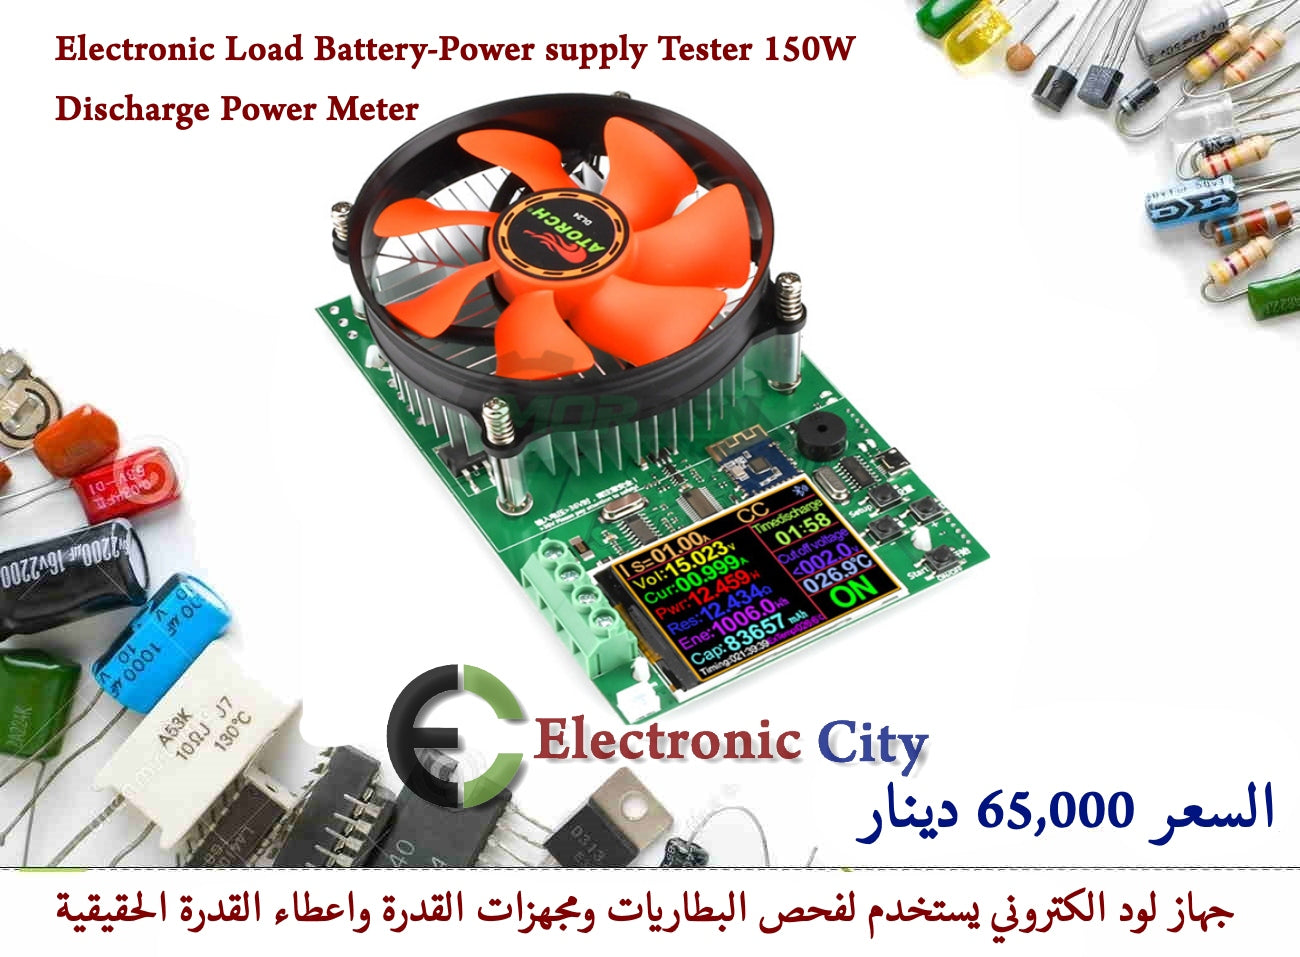 DL24 Electronic Load Battery-Power supply Tester 150W Discharge Power Meter XH0033